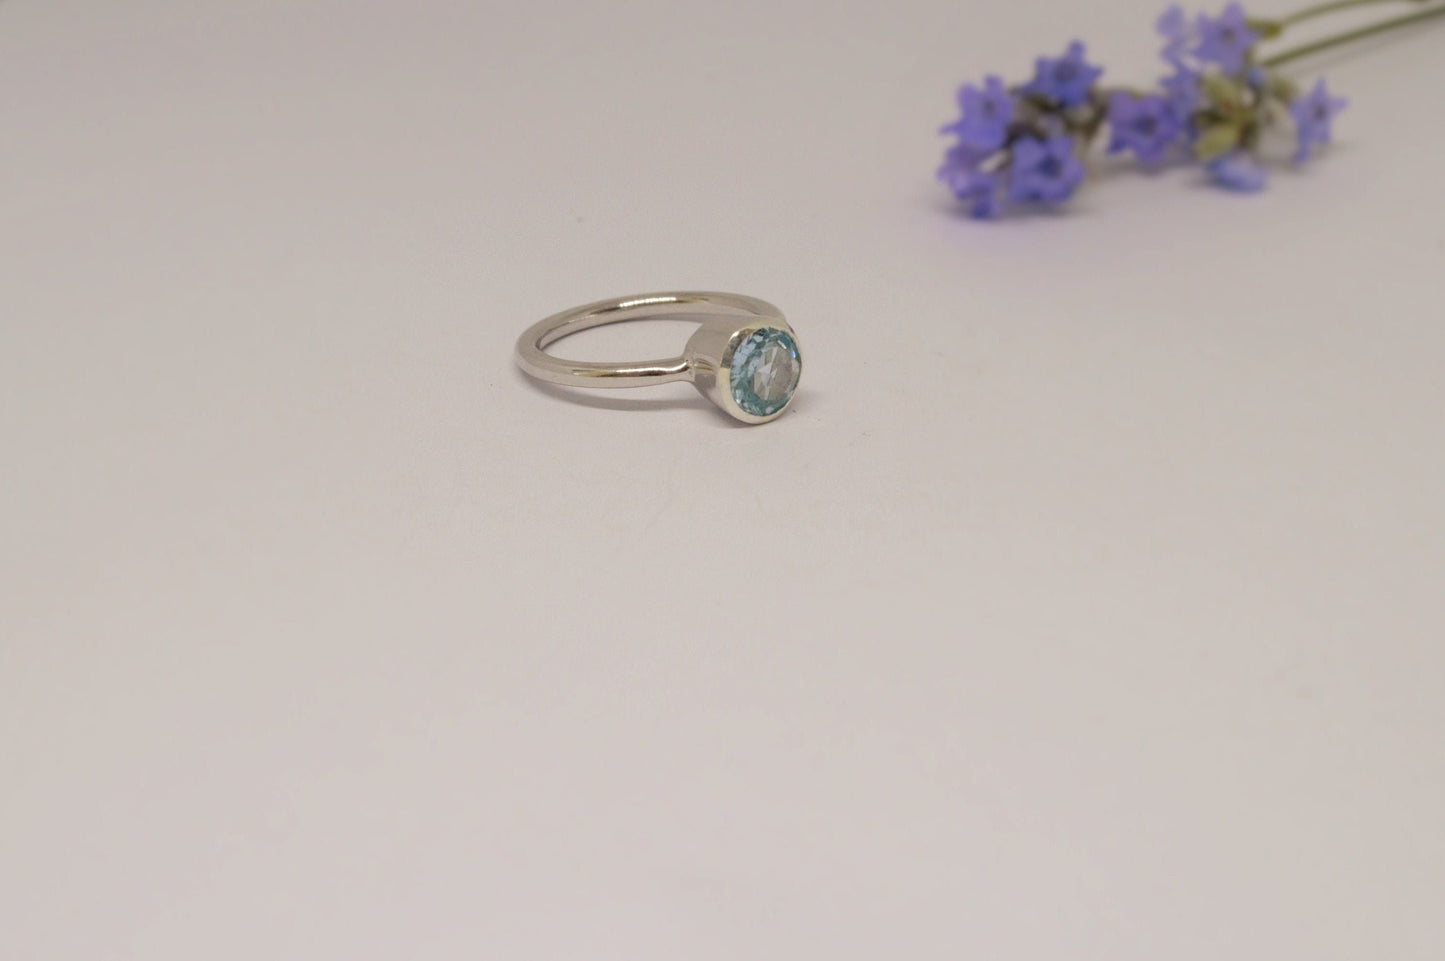 Blue Topaz Ring In 925 Sterling Silver, Unique Dainty Gem Ring, Statement Rings For Women, UK size O, December Birthstone, Gift For Her